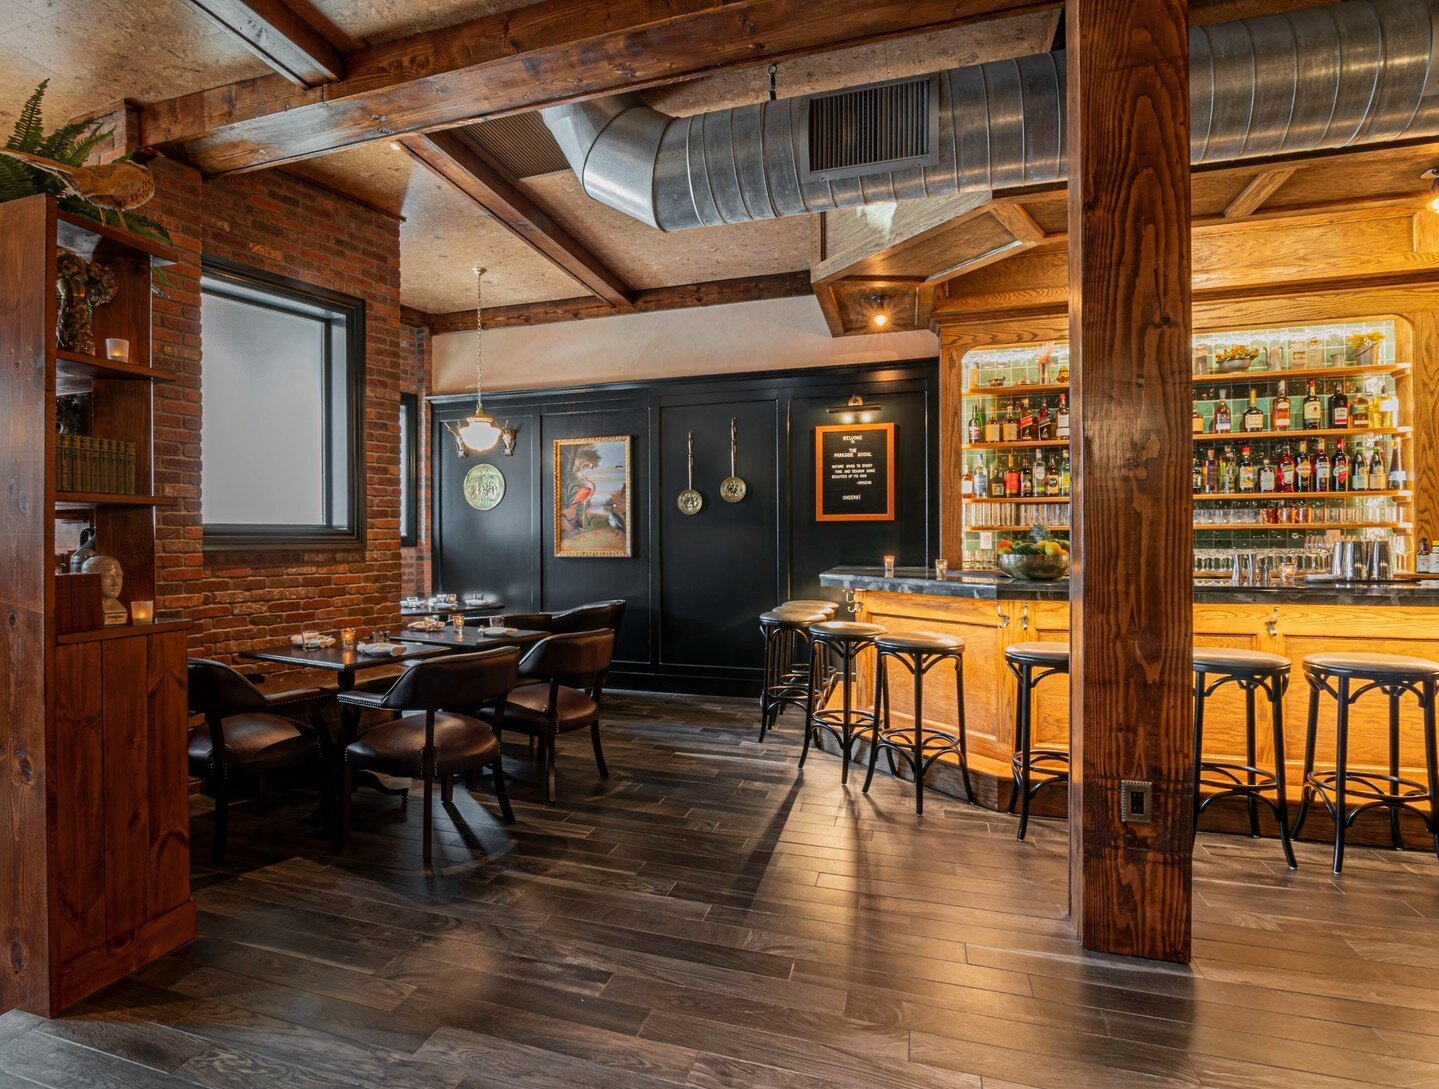 Need a nook?  Reserve our bar corner for smaller, less formal events @theparksidesocial!  Visit the events tab on our website for more information or email us at events@skoposhospitality.com
.
.
.
.
#parksidesocial #veronanj #verona #veronabar #north